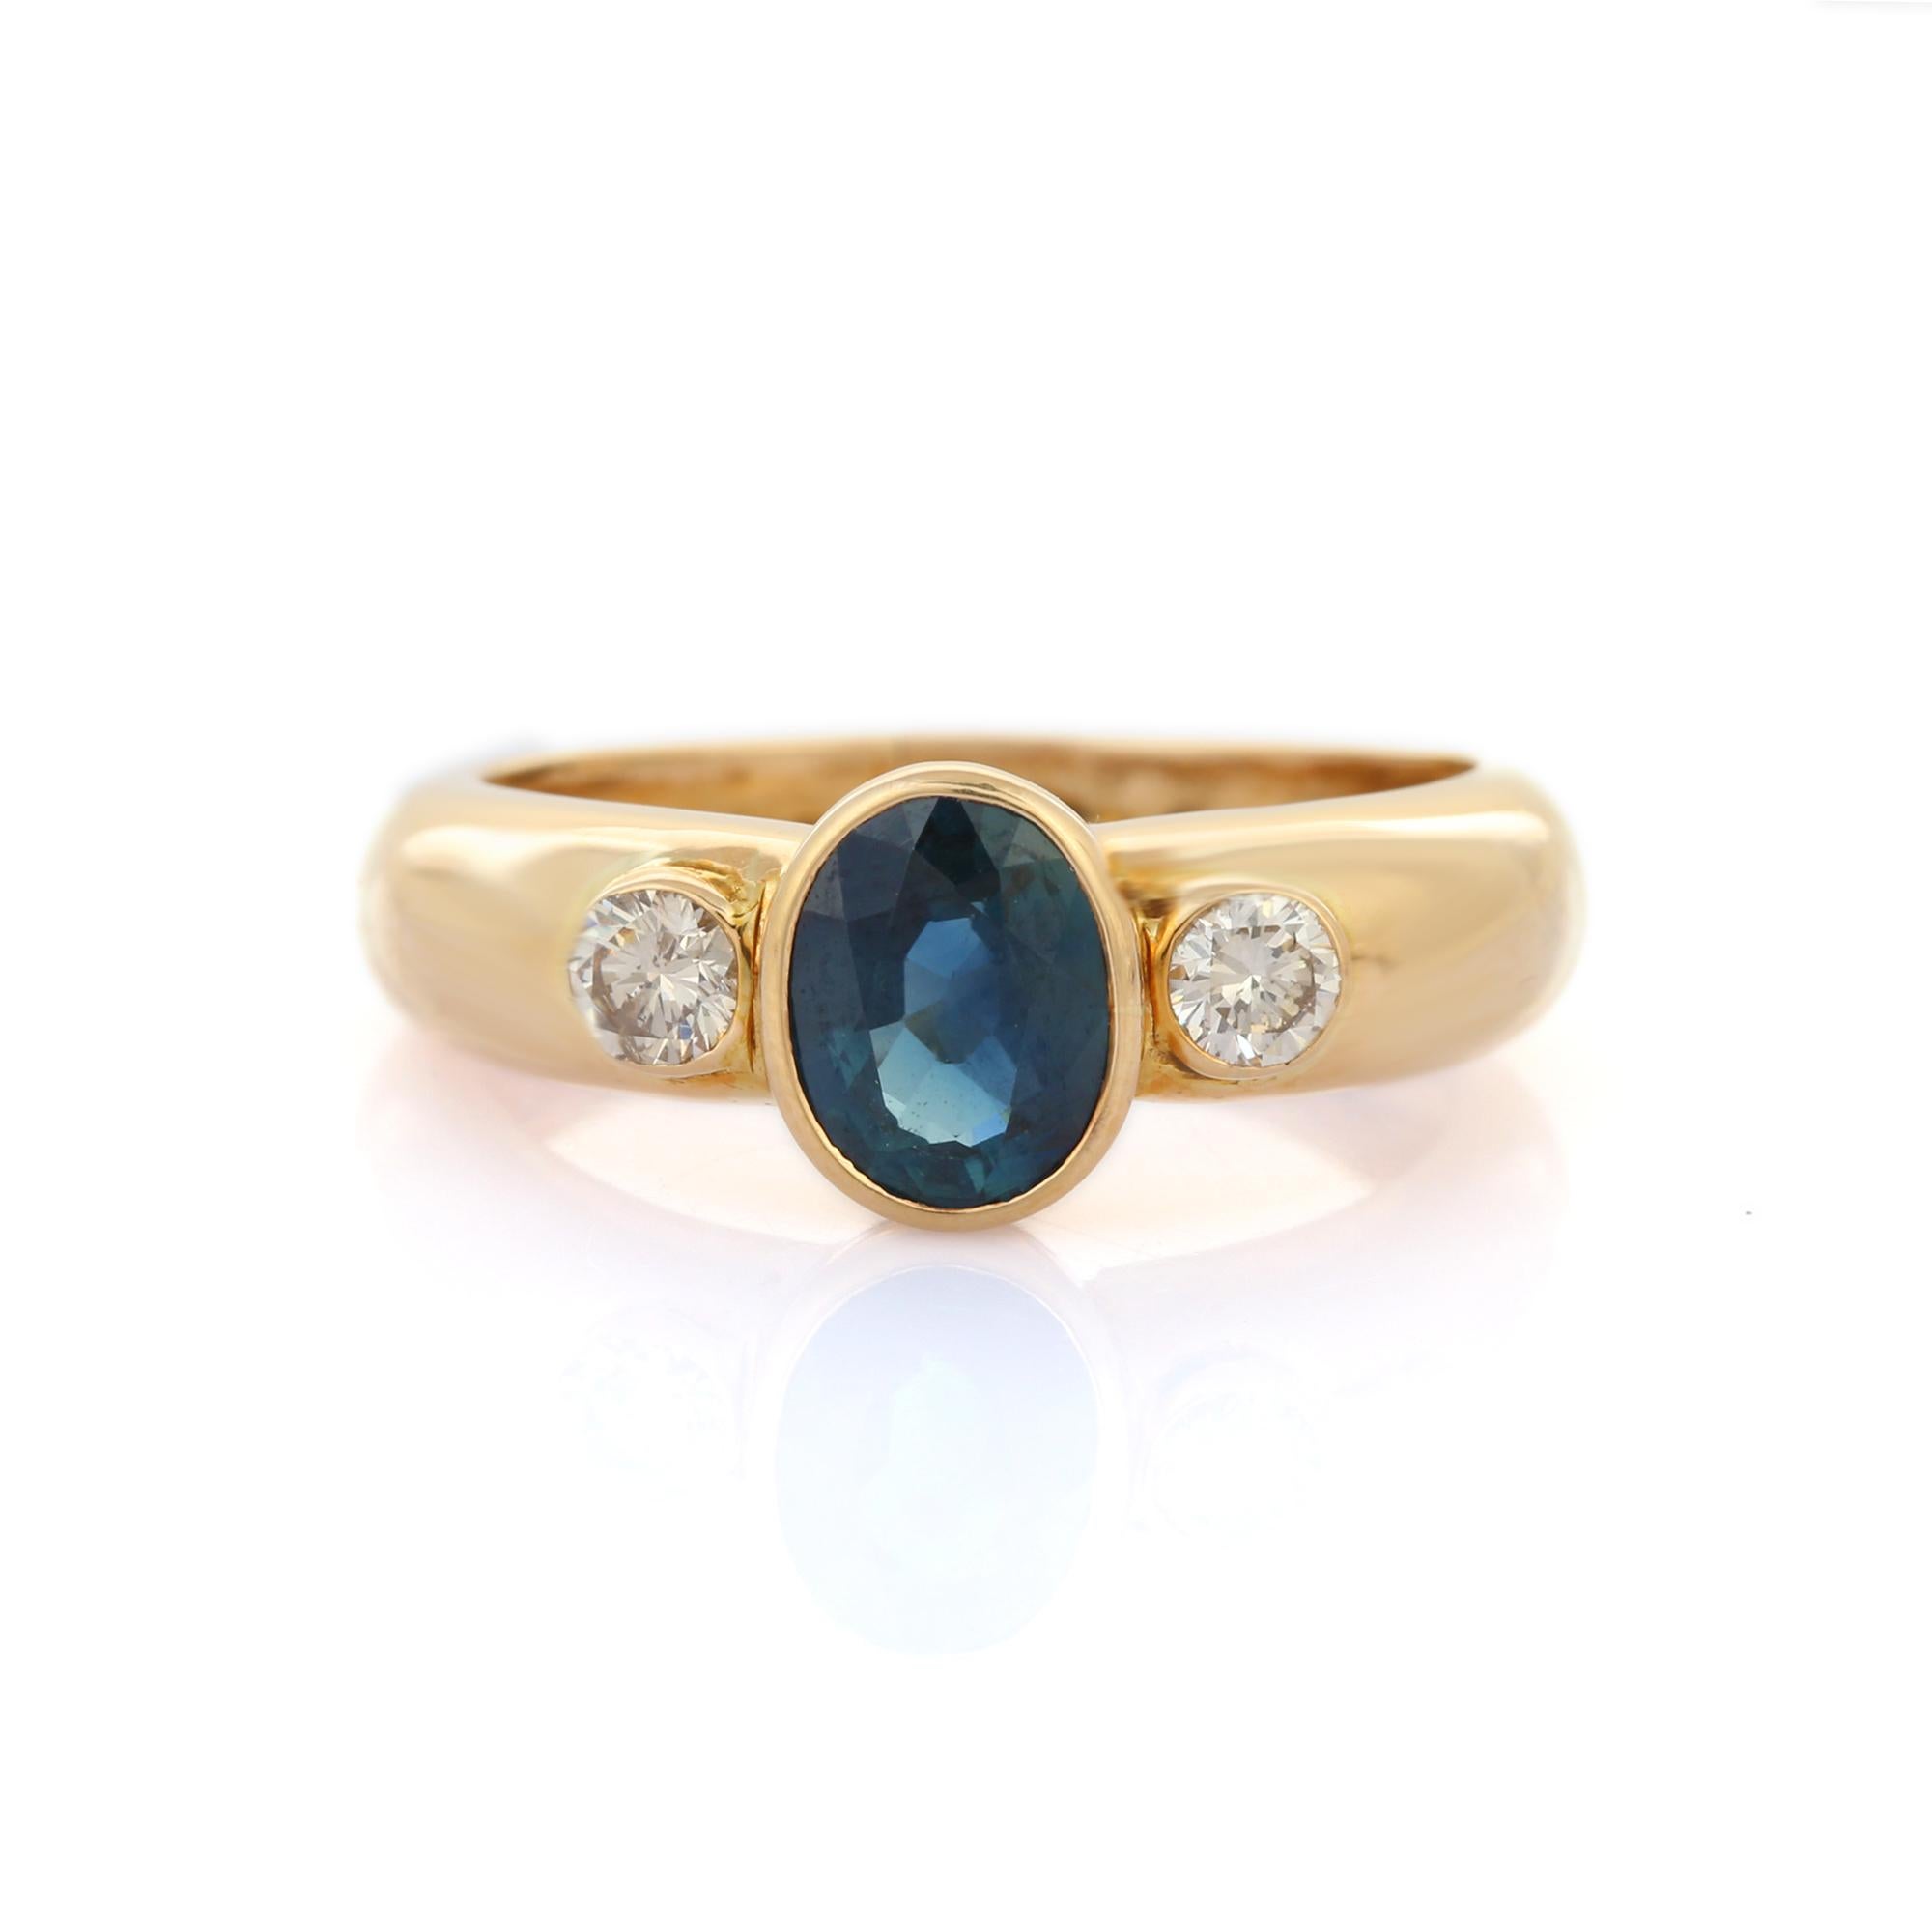 For Sale:  18k Solid Yellow Gold Unisex Blue Sapphire Diamond Three-Stone Engagement Ring 2